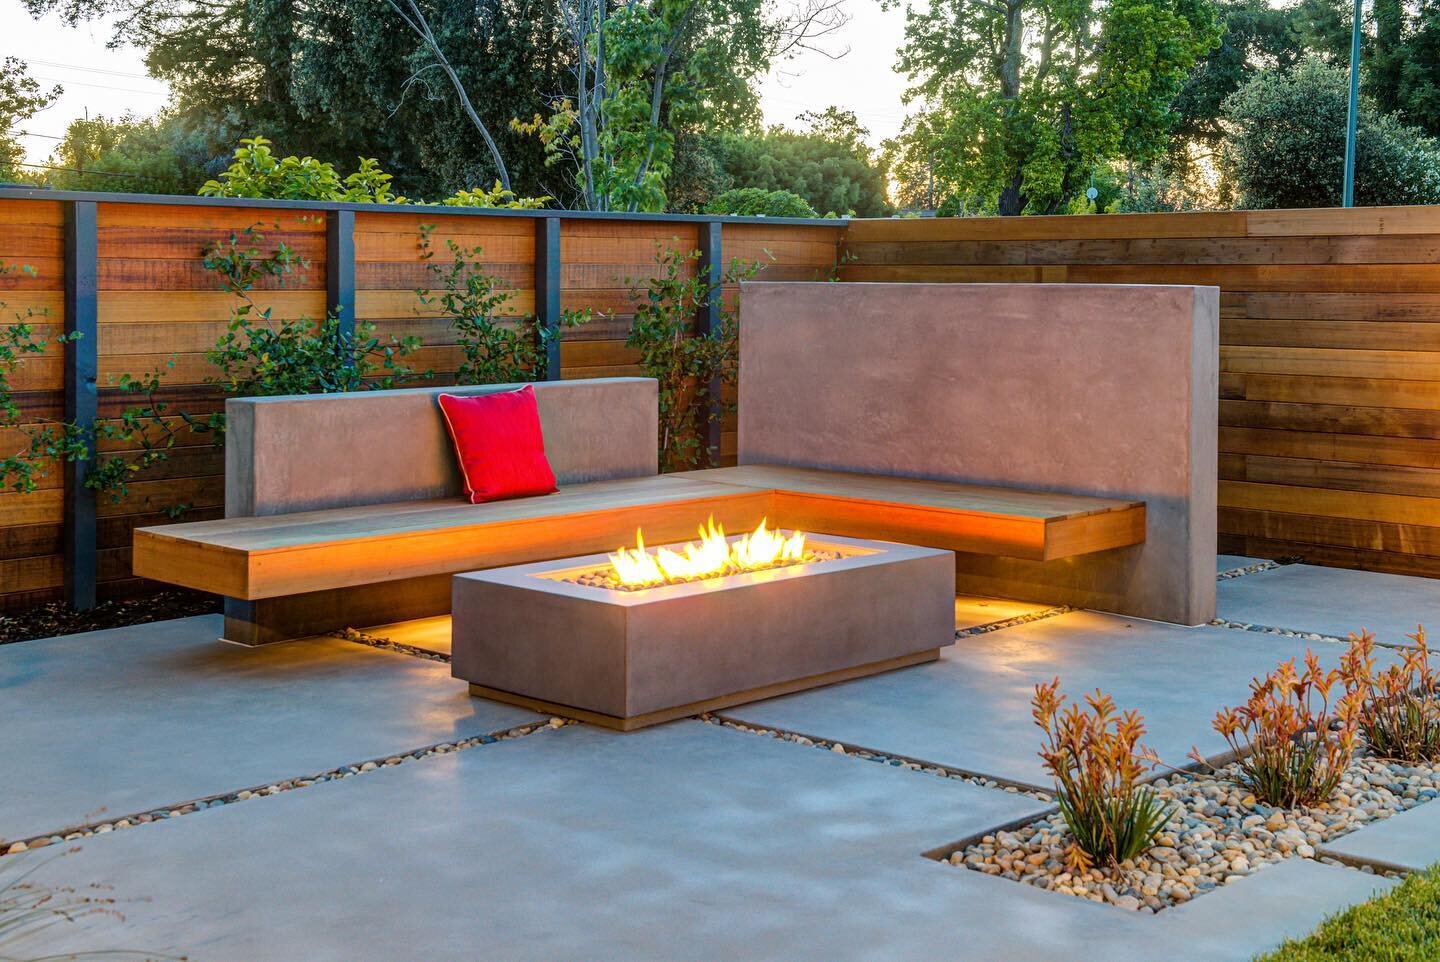 A truly enchanting space to enjoy evenings year round must include a fire pit and nature throughout. 🌅😍
&bull;
&bull;
&bull;
&bull; 
📷 @trevejohnsonphotography 
LA: @birchriverdesign 
&mdash;&mdash;&mdash;&mdash;&mdash;&mdash;&mdash;&mdash;&mdash;